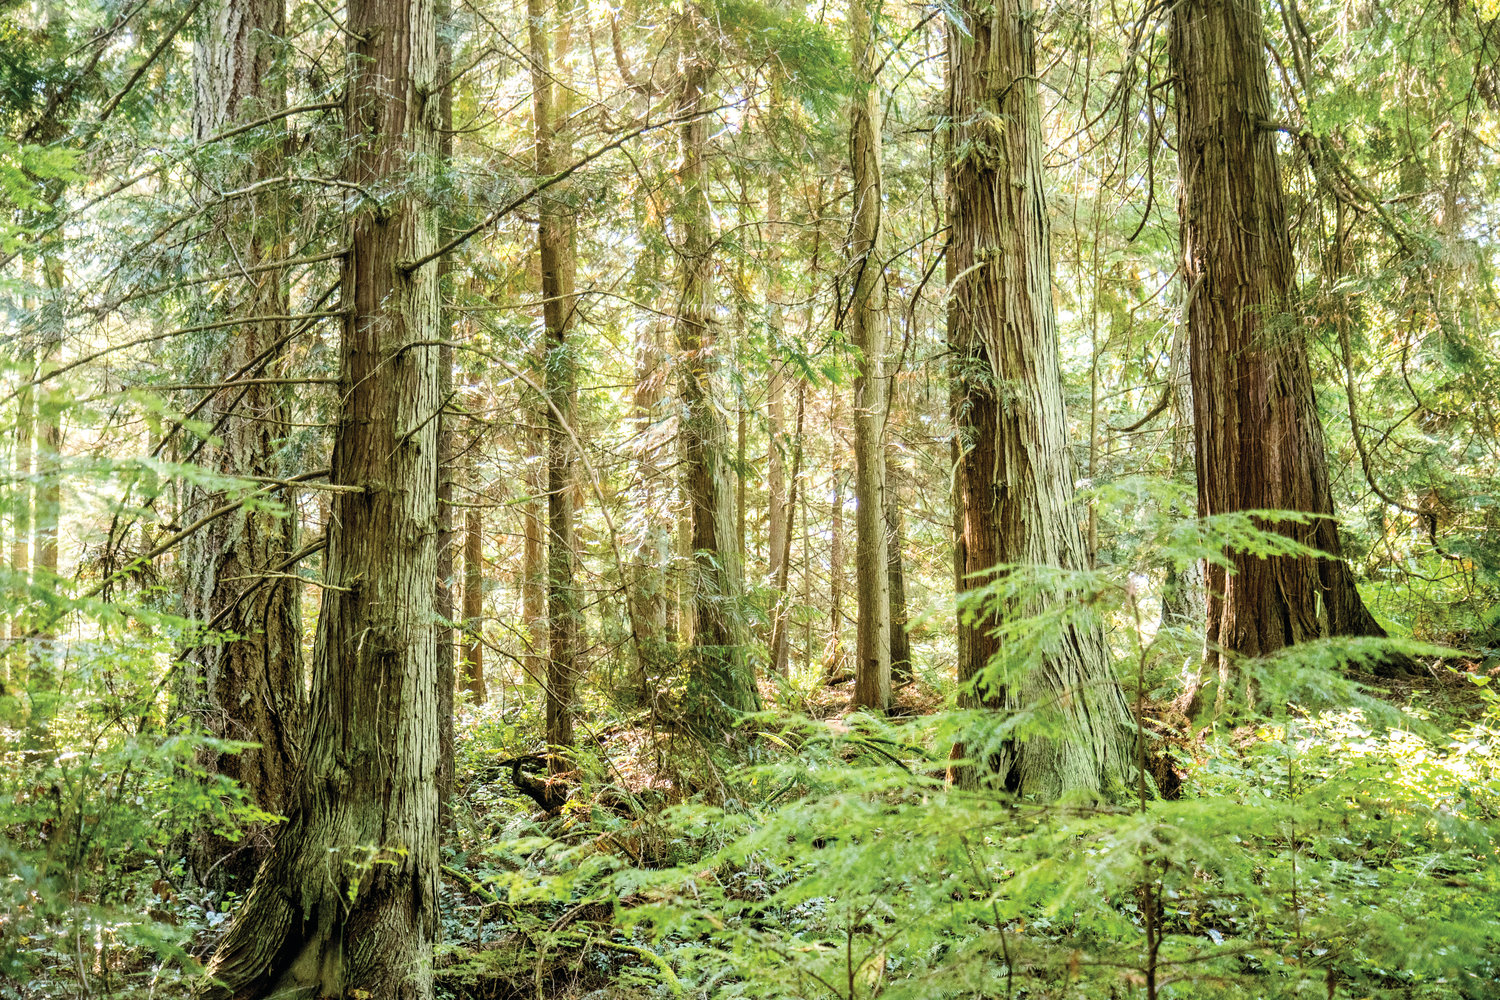 A stand of trees—all over 100 years old—has been determined to be “old growth” under the state Department of Natural Resources’ definition of old growth. Now the parcel, which is owned by DNR, is not going to be harvested.